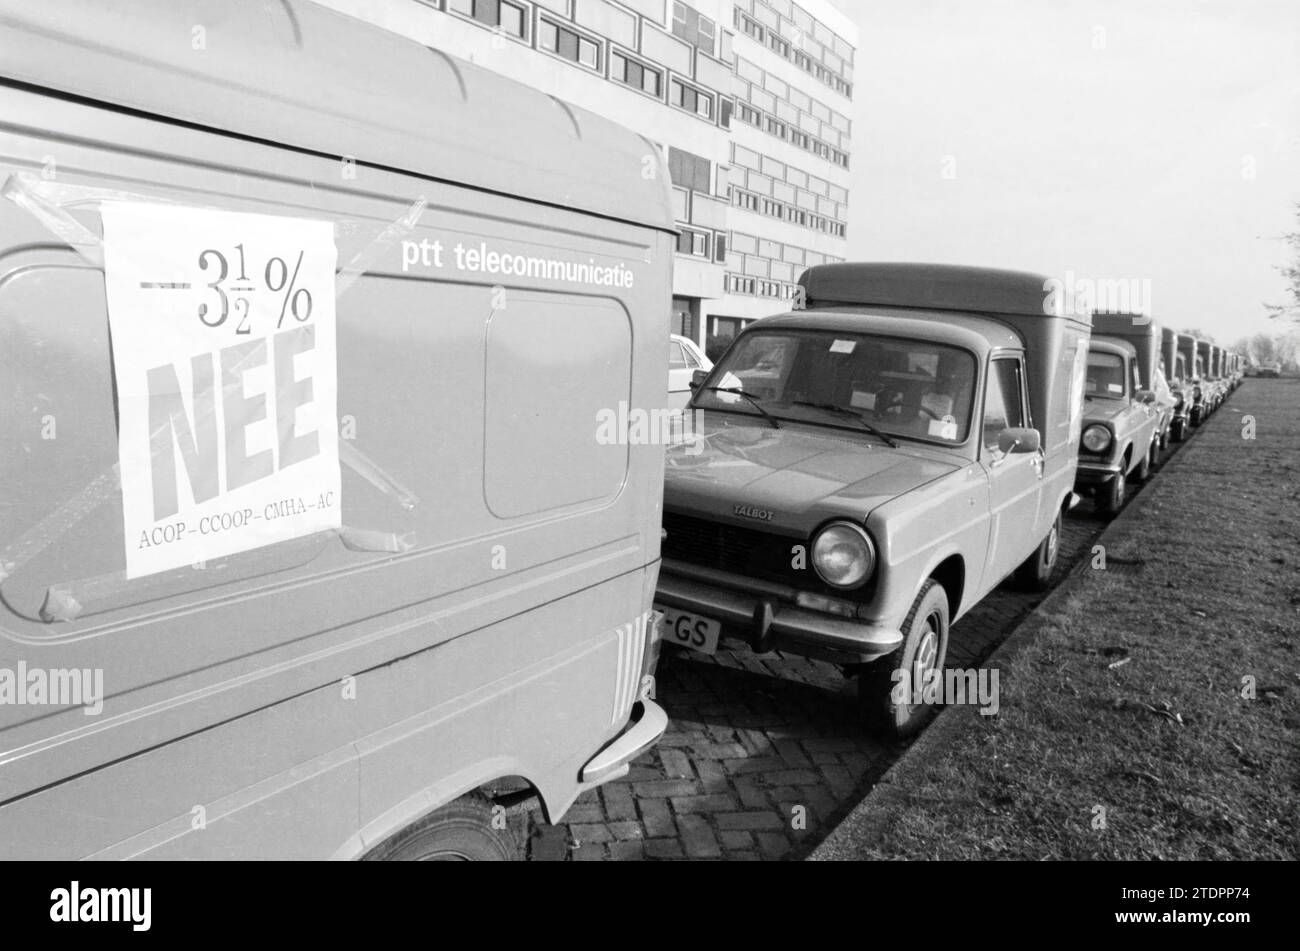 PTT cars Waarderpolder, PTT, post office, city post, Haarlem, The Netherlands, 10-11-1983, Whizgle News from the Past, Tailored for the Future. Explore historical narratives, Dutch The Netherlands agency image with a modern perspective, bridging the gap between yesterday's events and tomorrow's insights. A timeless journey shaping the stories that shape our future Stock Photo